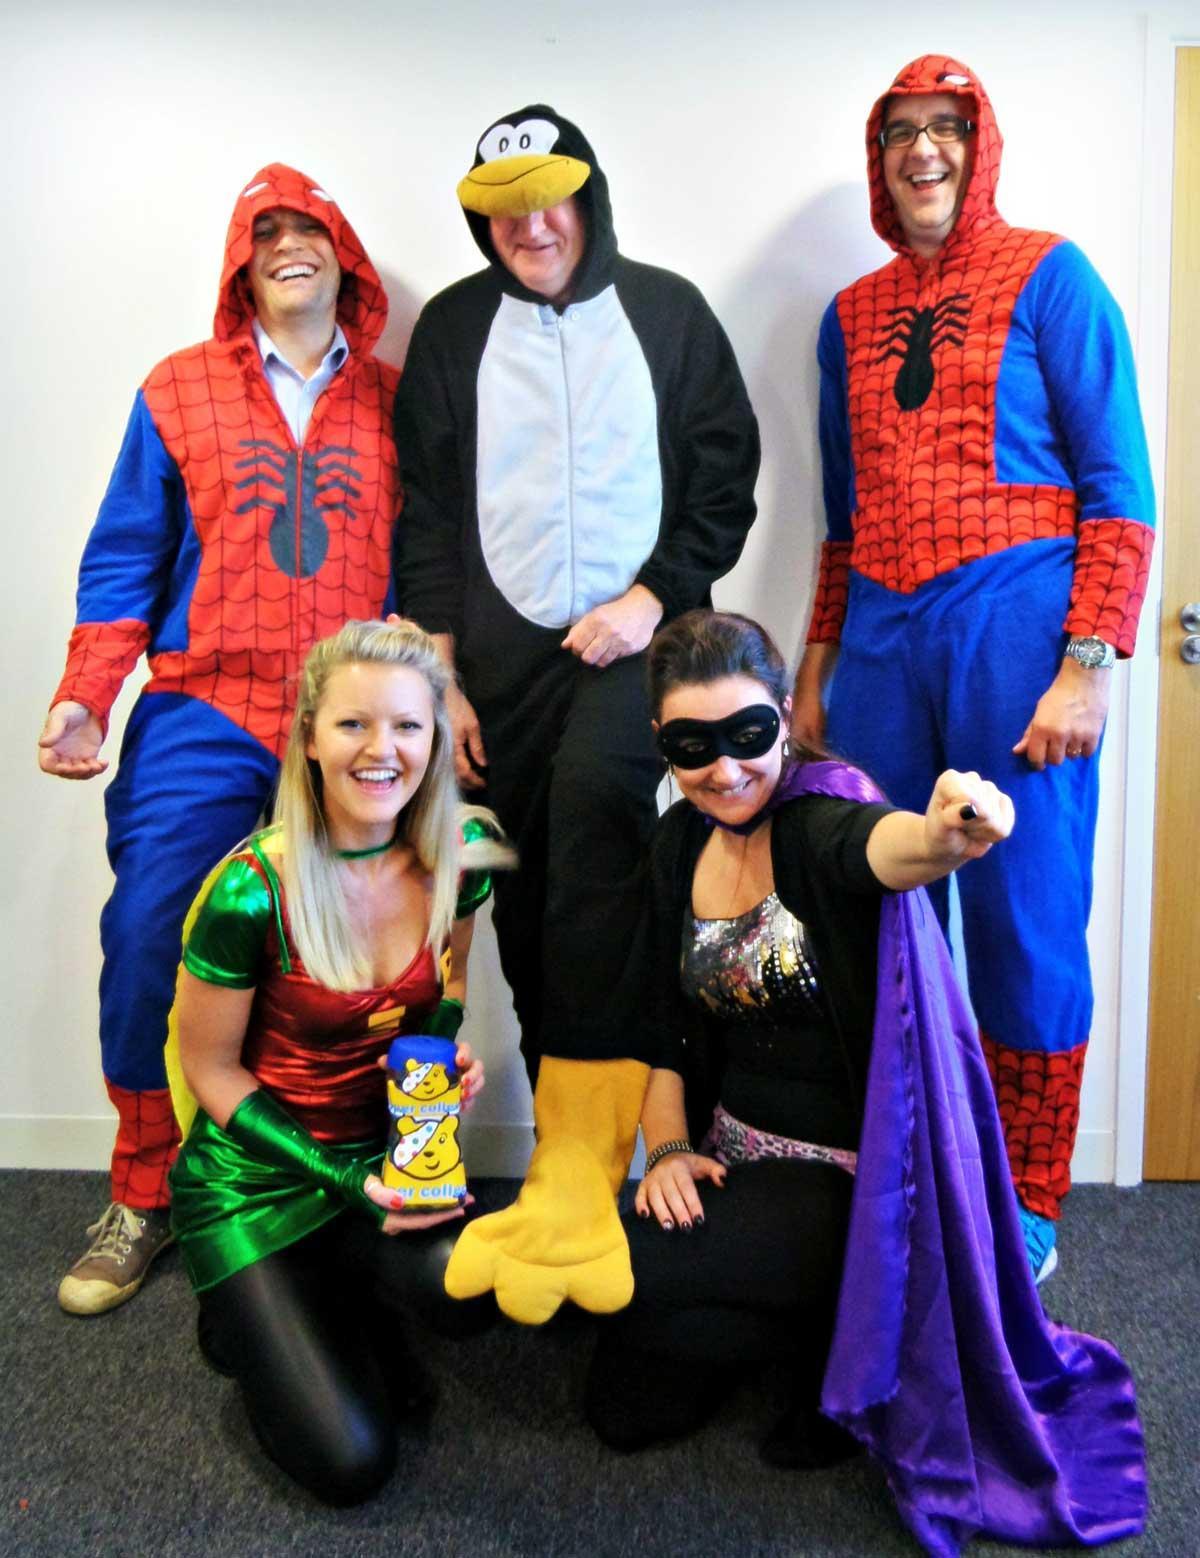 Staff at Bourne Steel in Poole have raised over £300 for Children in Need through a pizza and cake sale, fancy dress and copper collection.